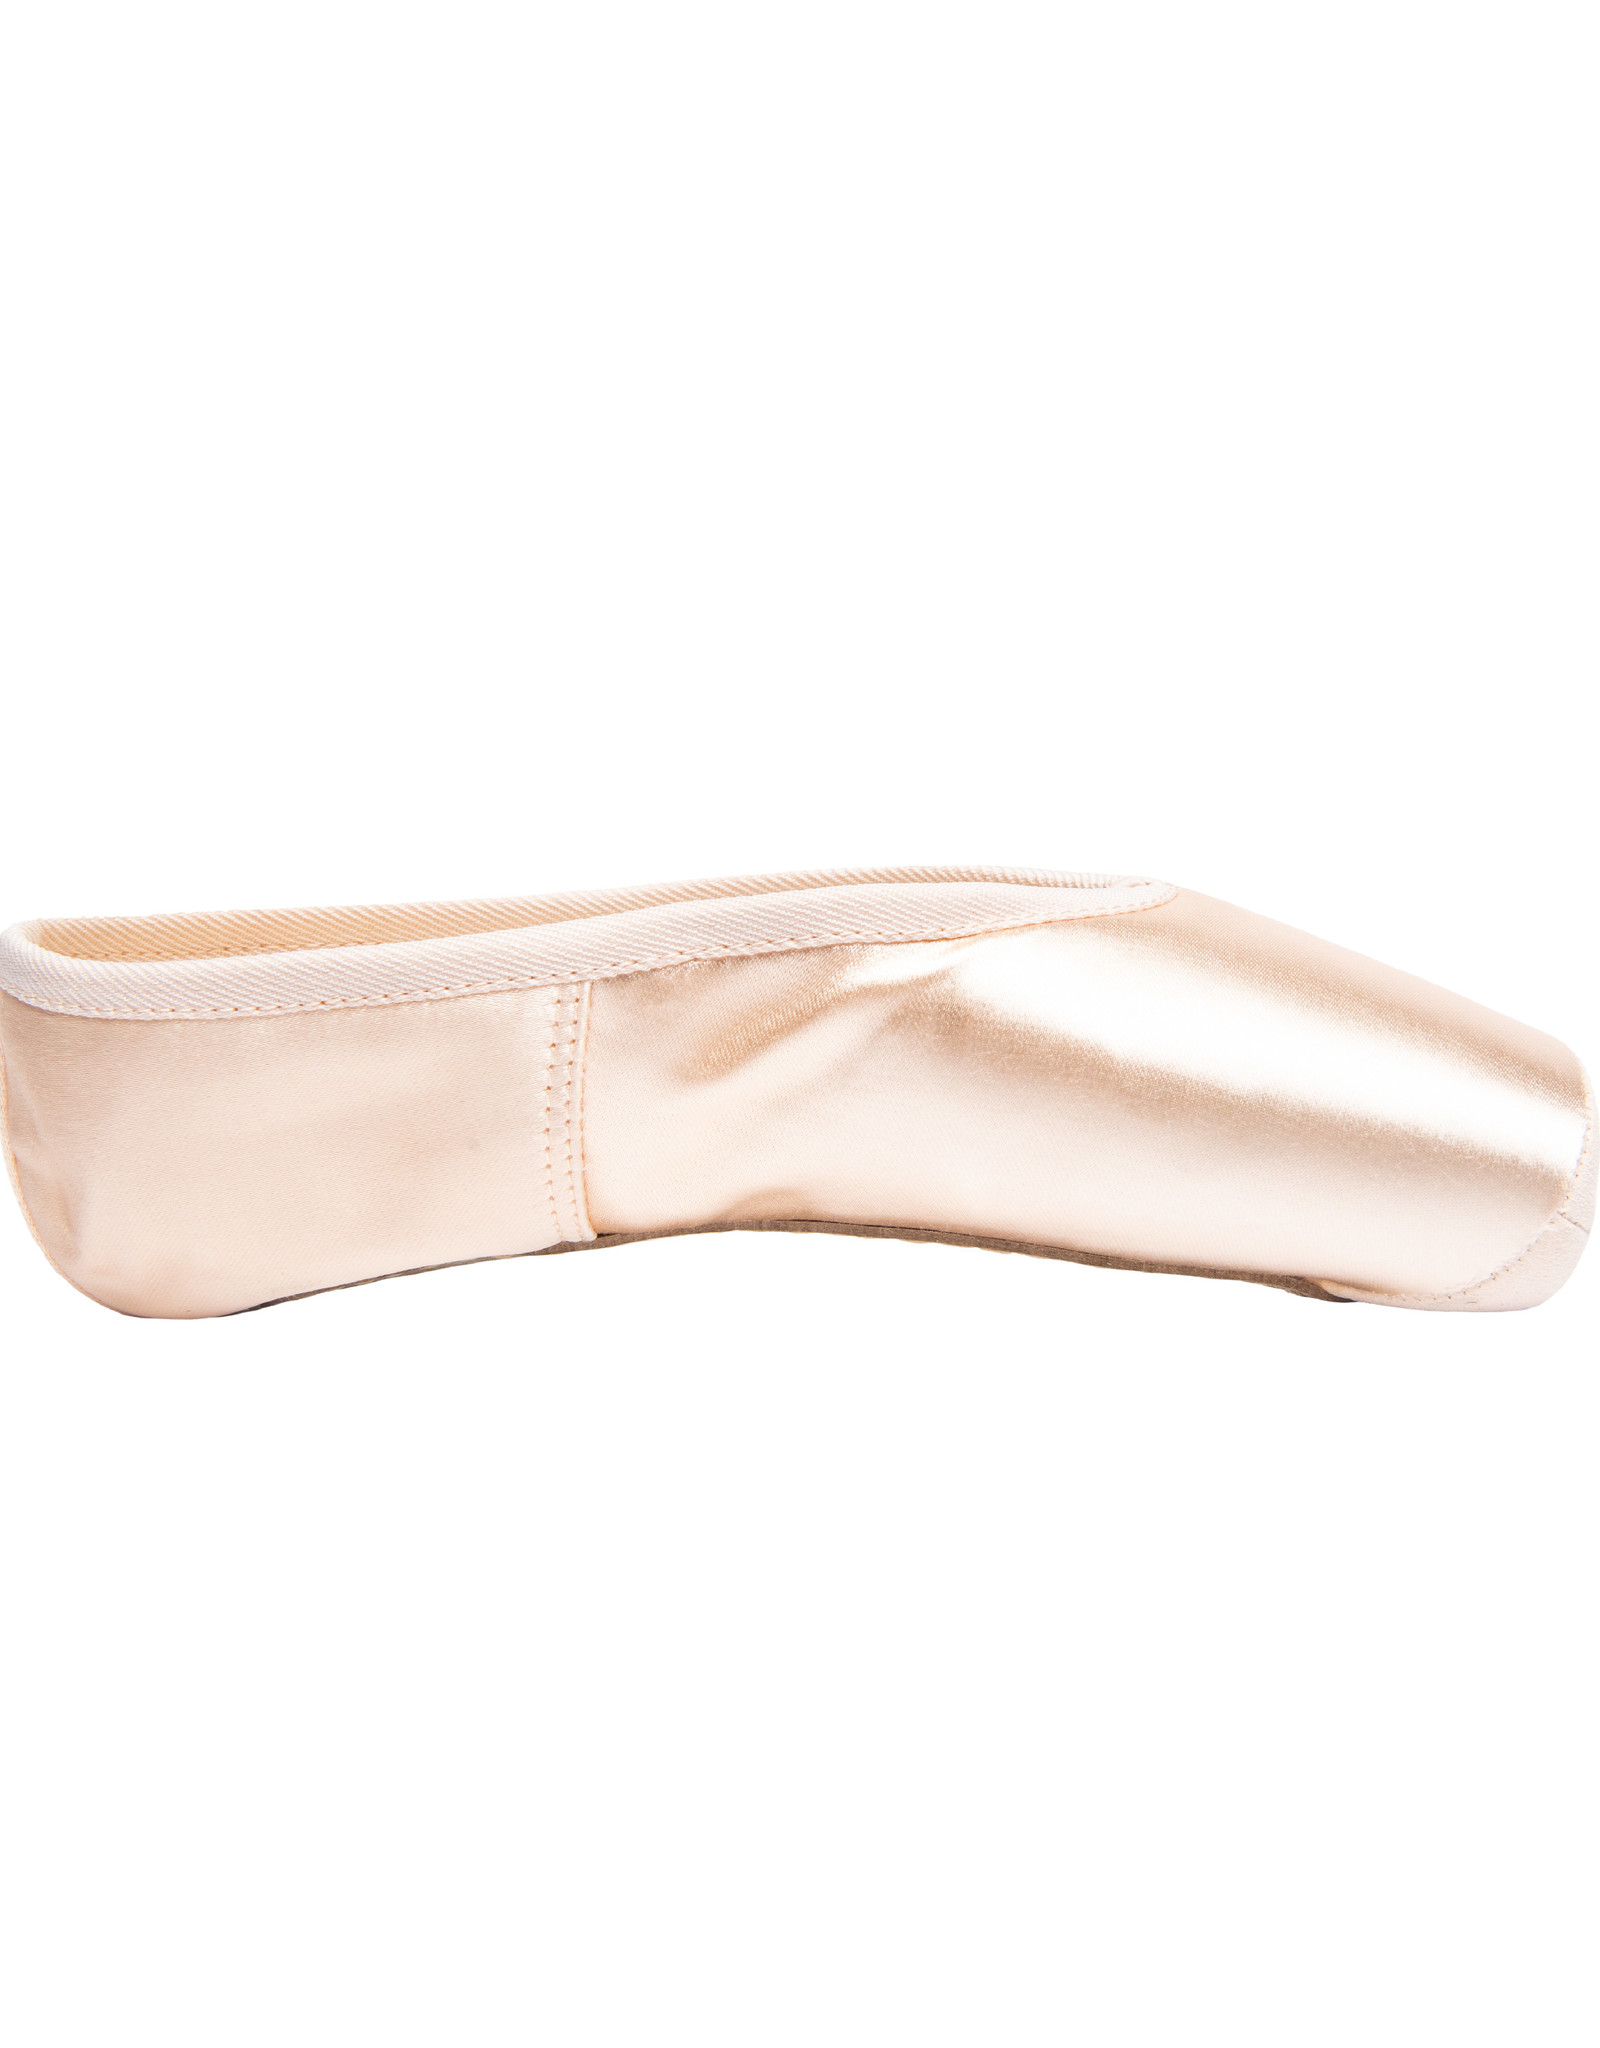 RP Collection Radiance U-Cut with Drawstring Pointe Shoes